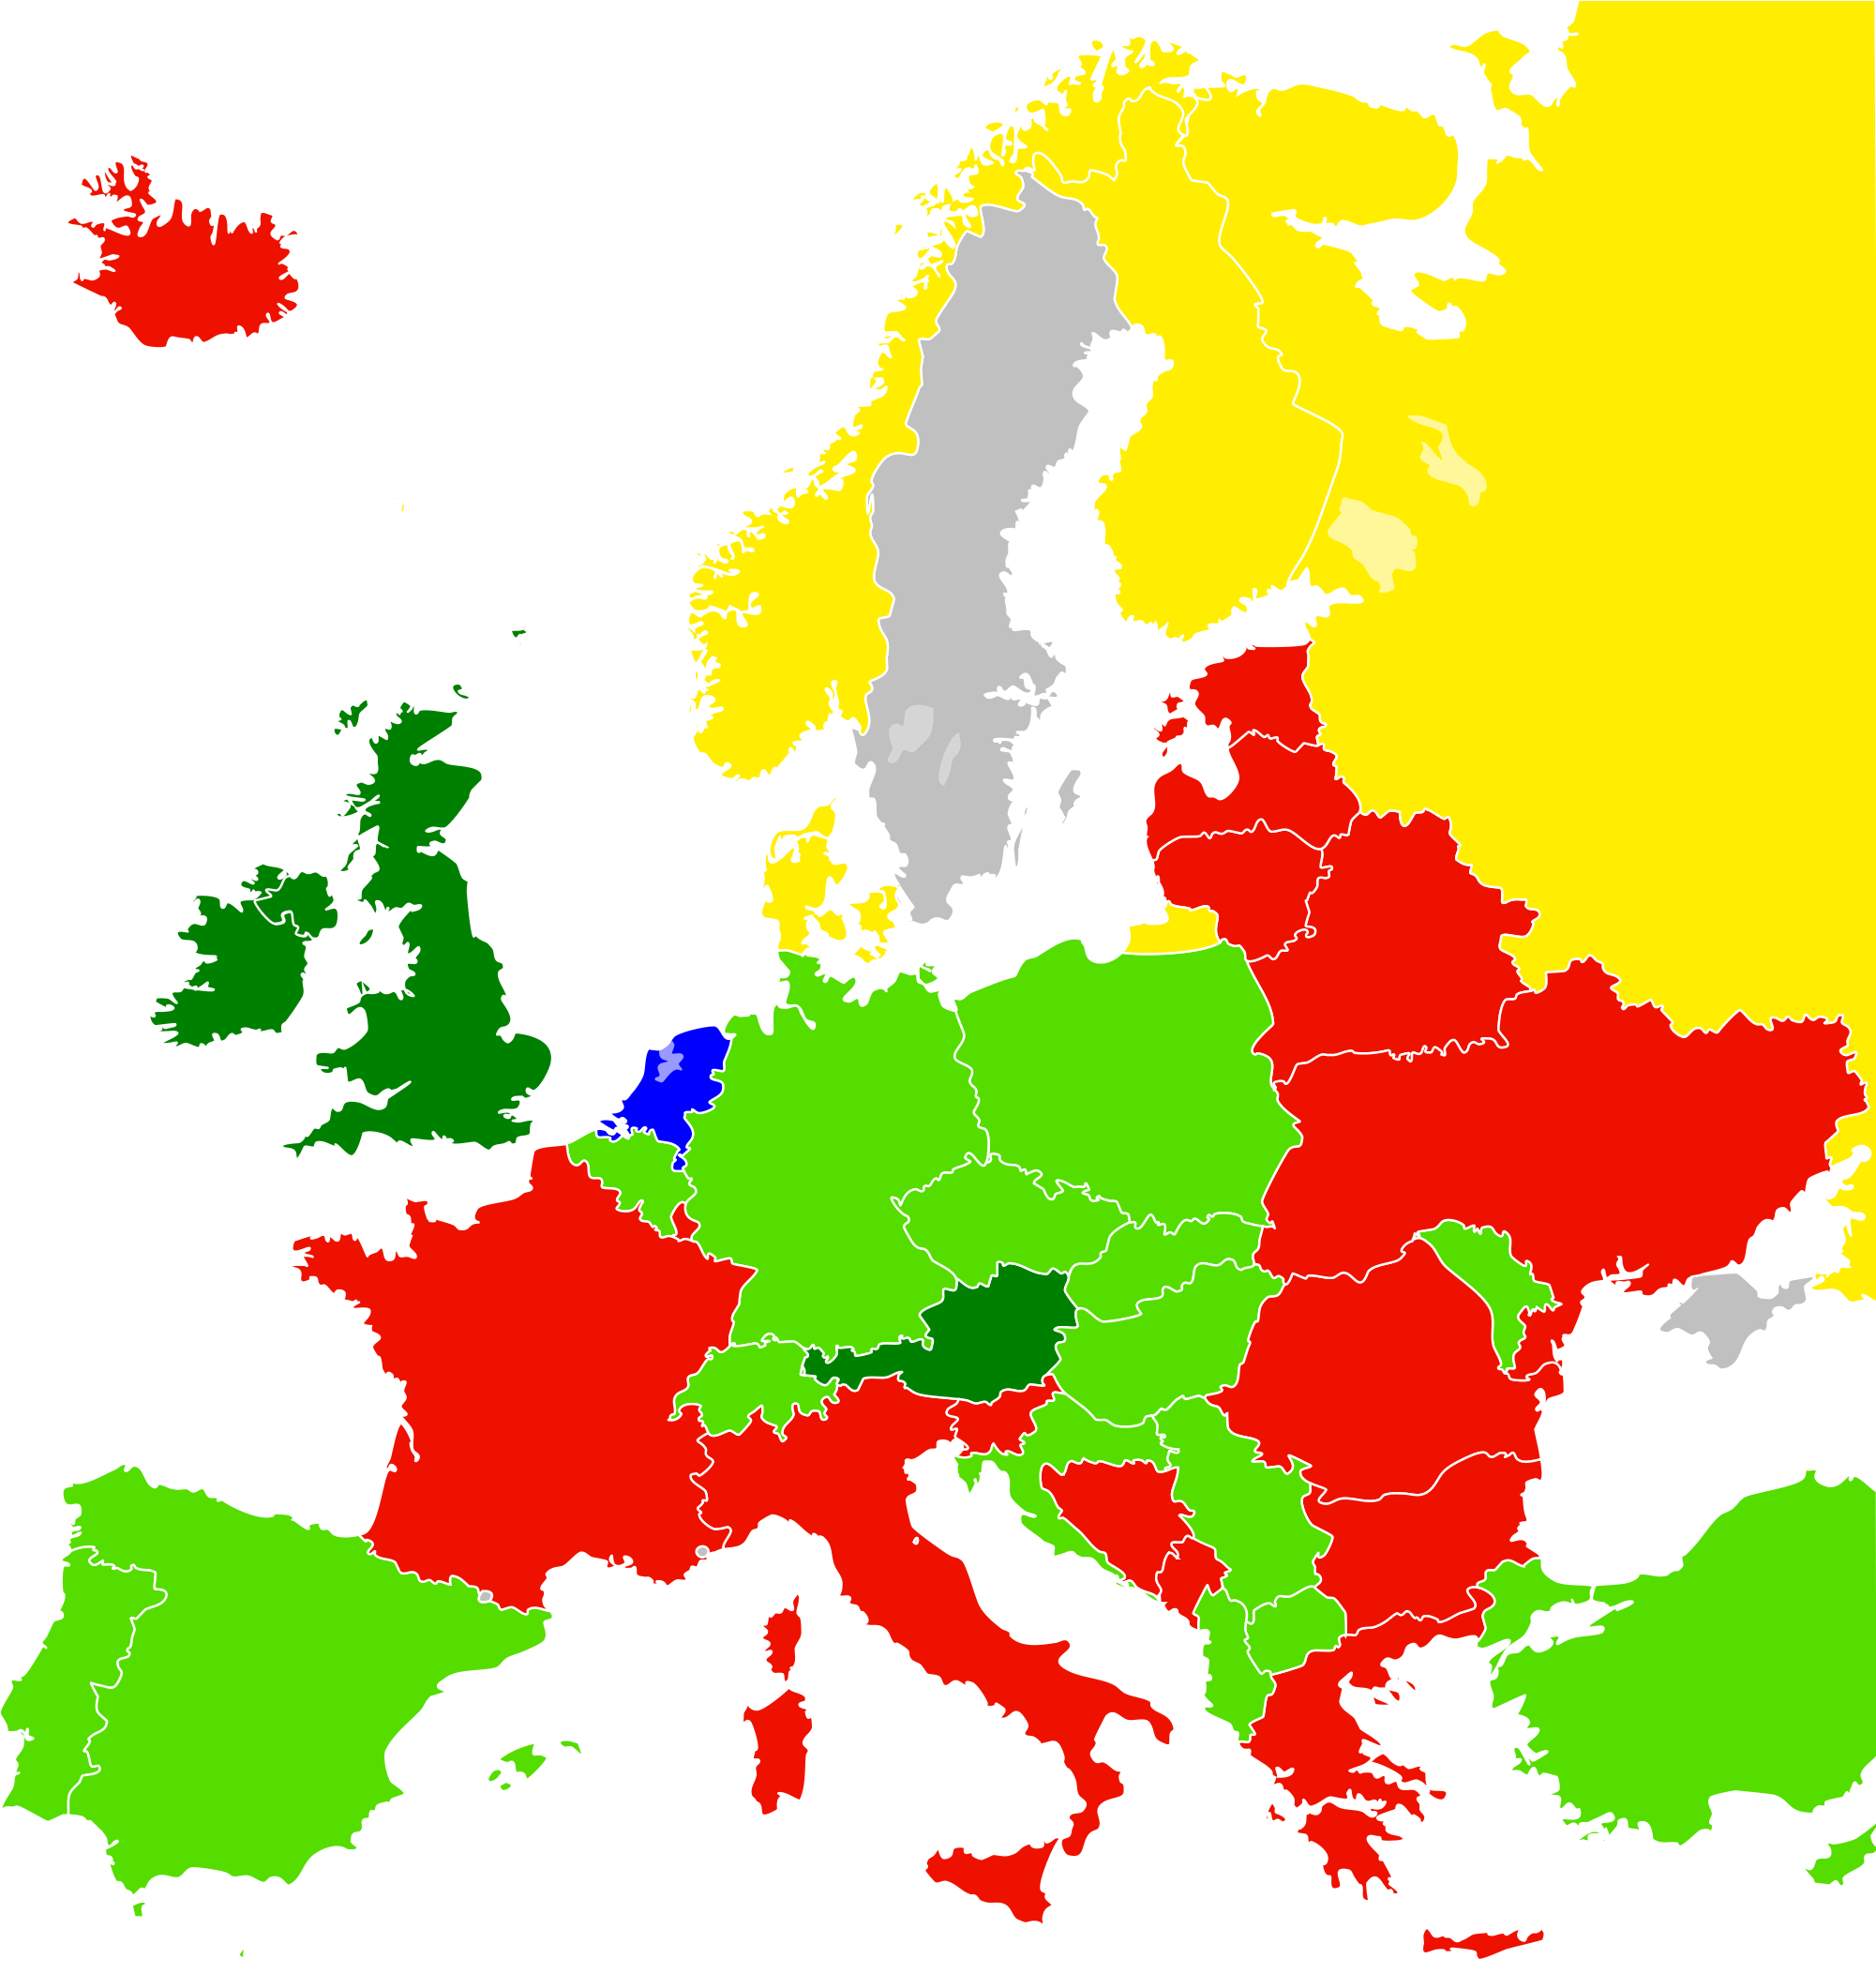 Open - Single Euro Payments Area (2000x2140)